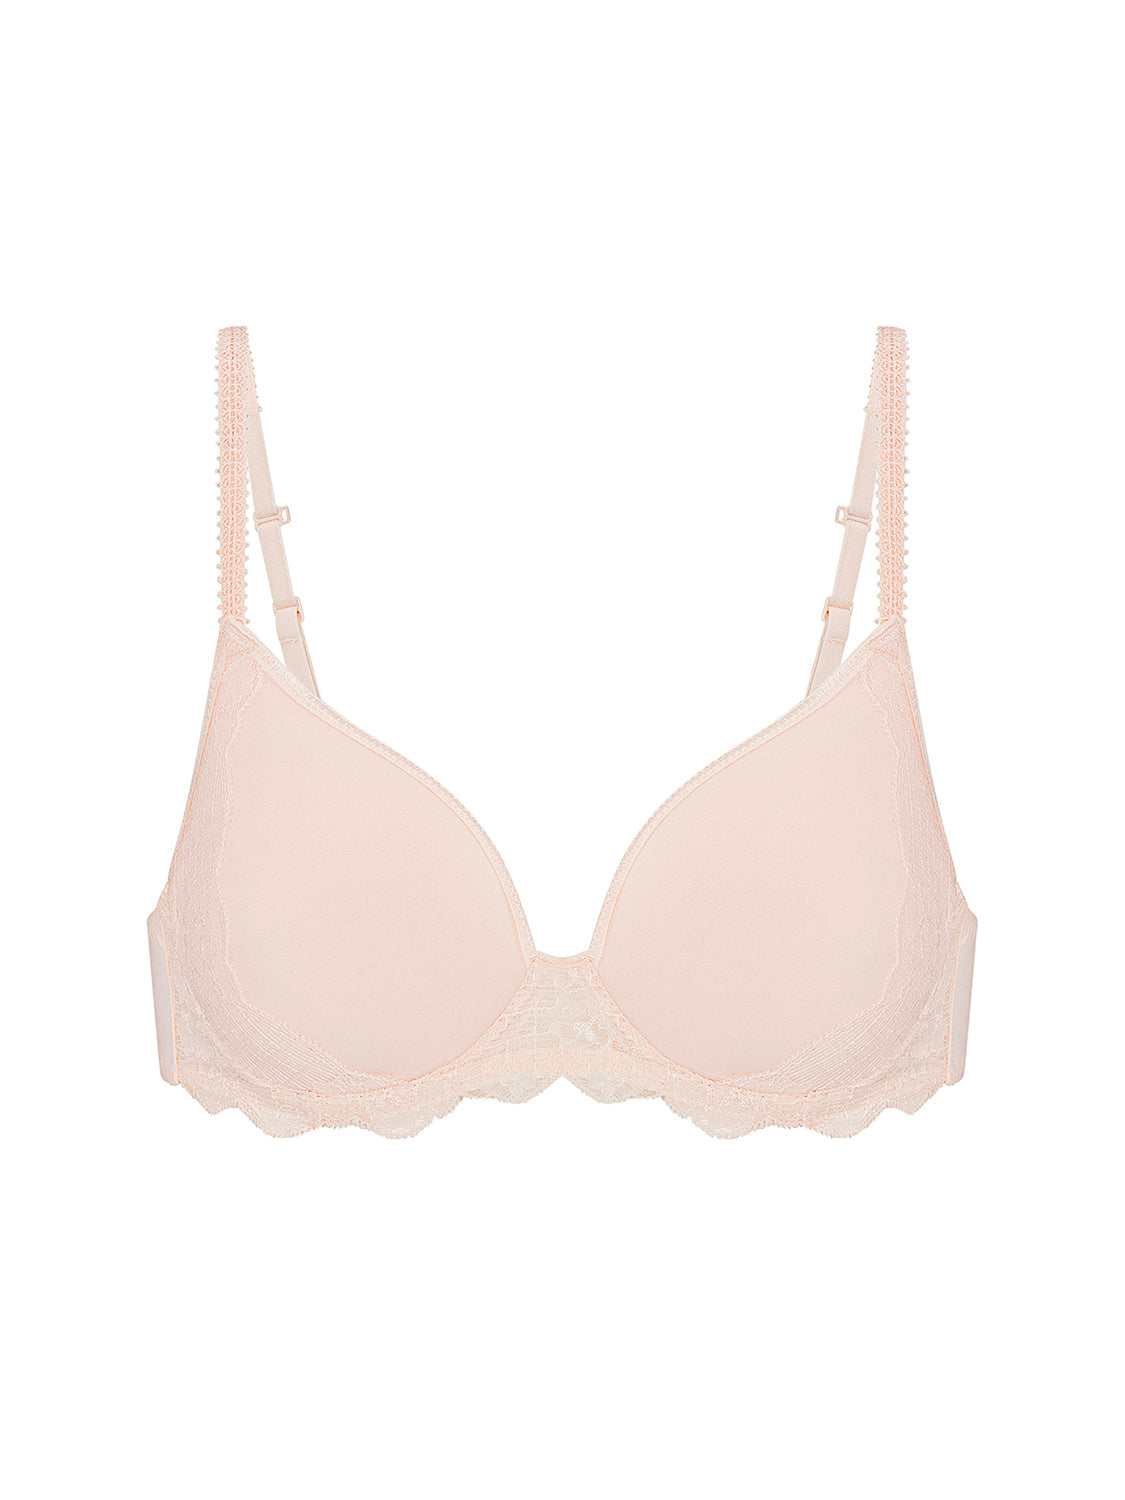 Collezione intimo donna Immagination - Non-wired unlined bra and Laser cut  brief - Leilieve